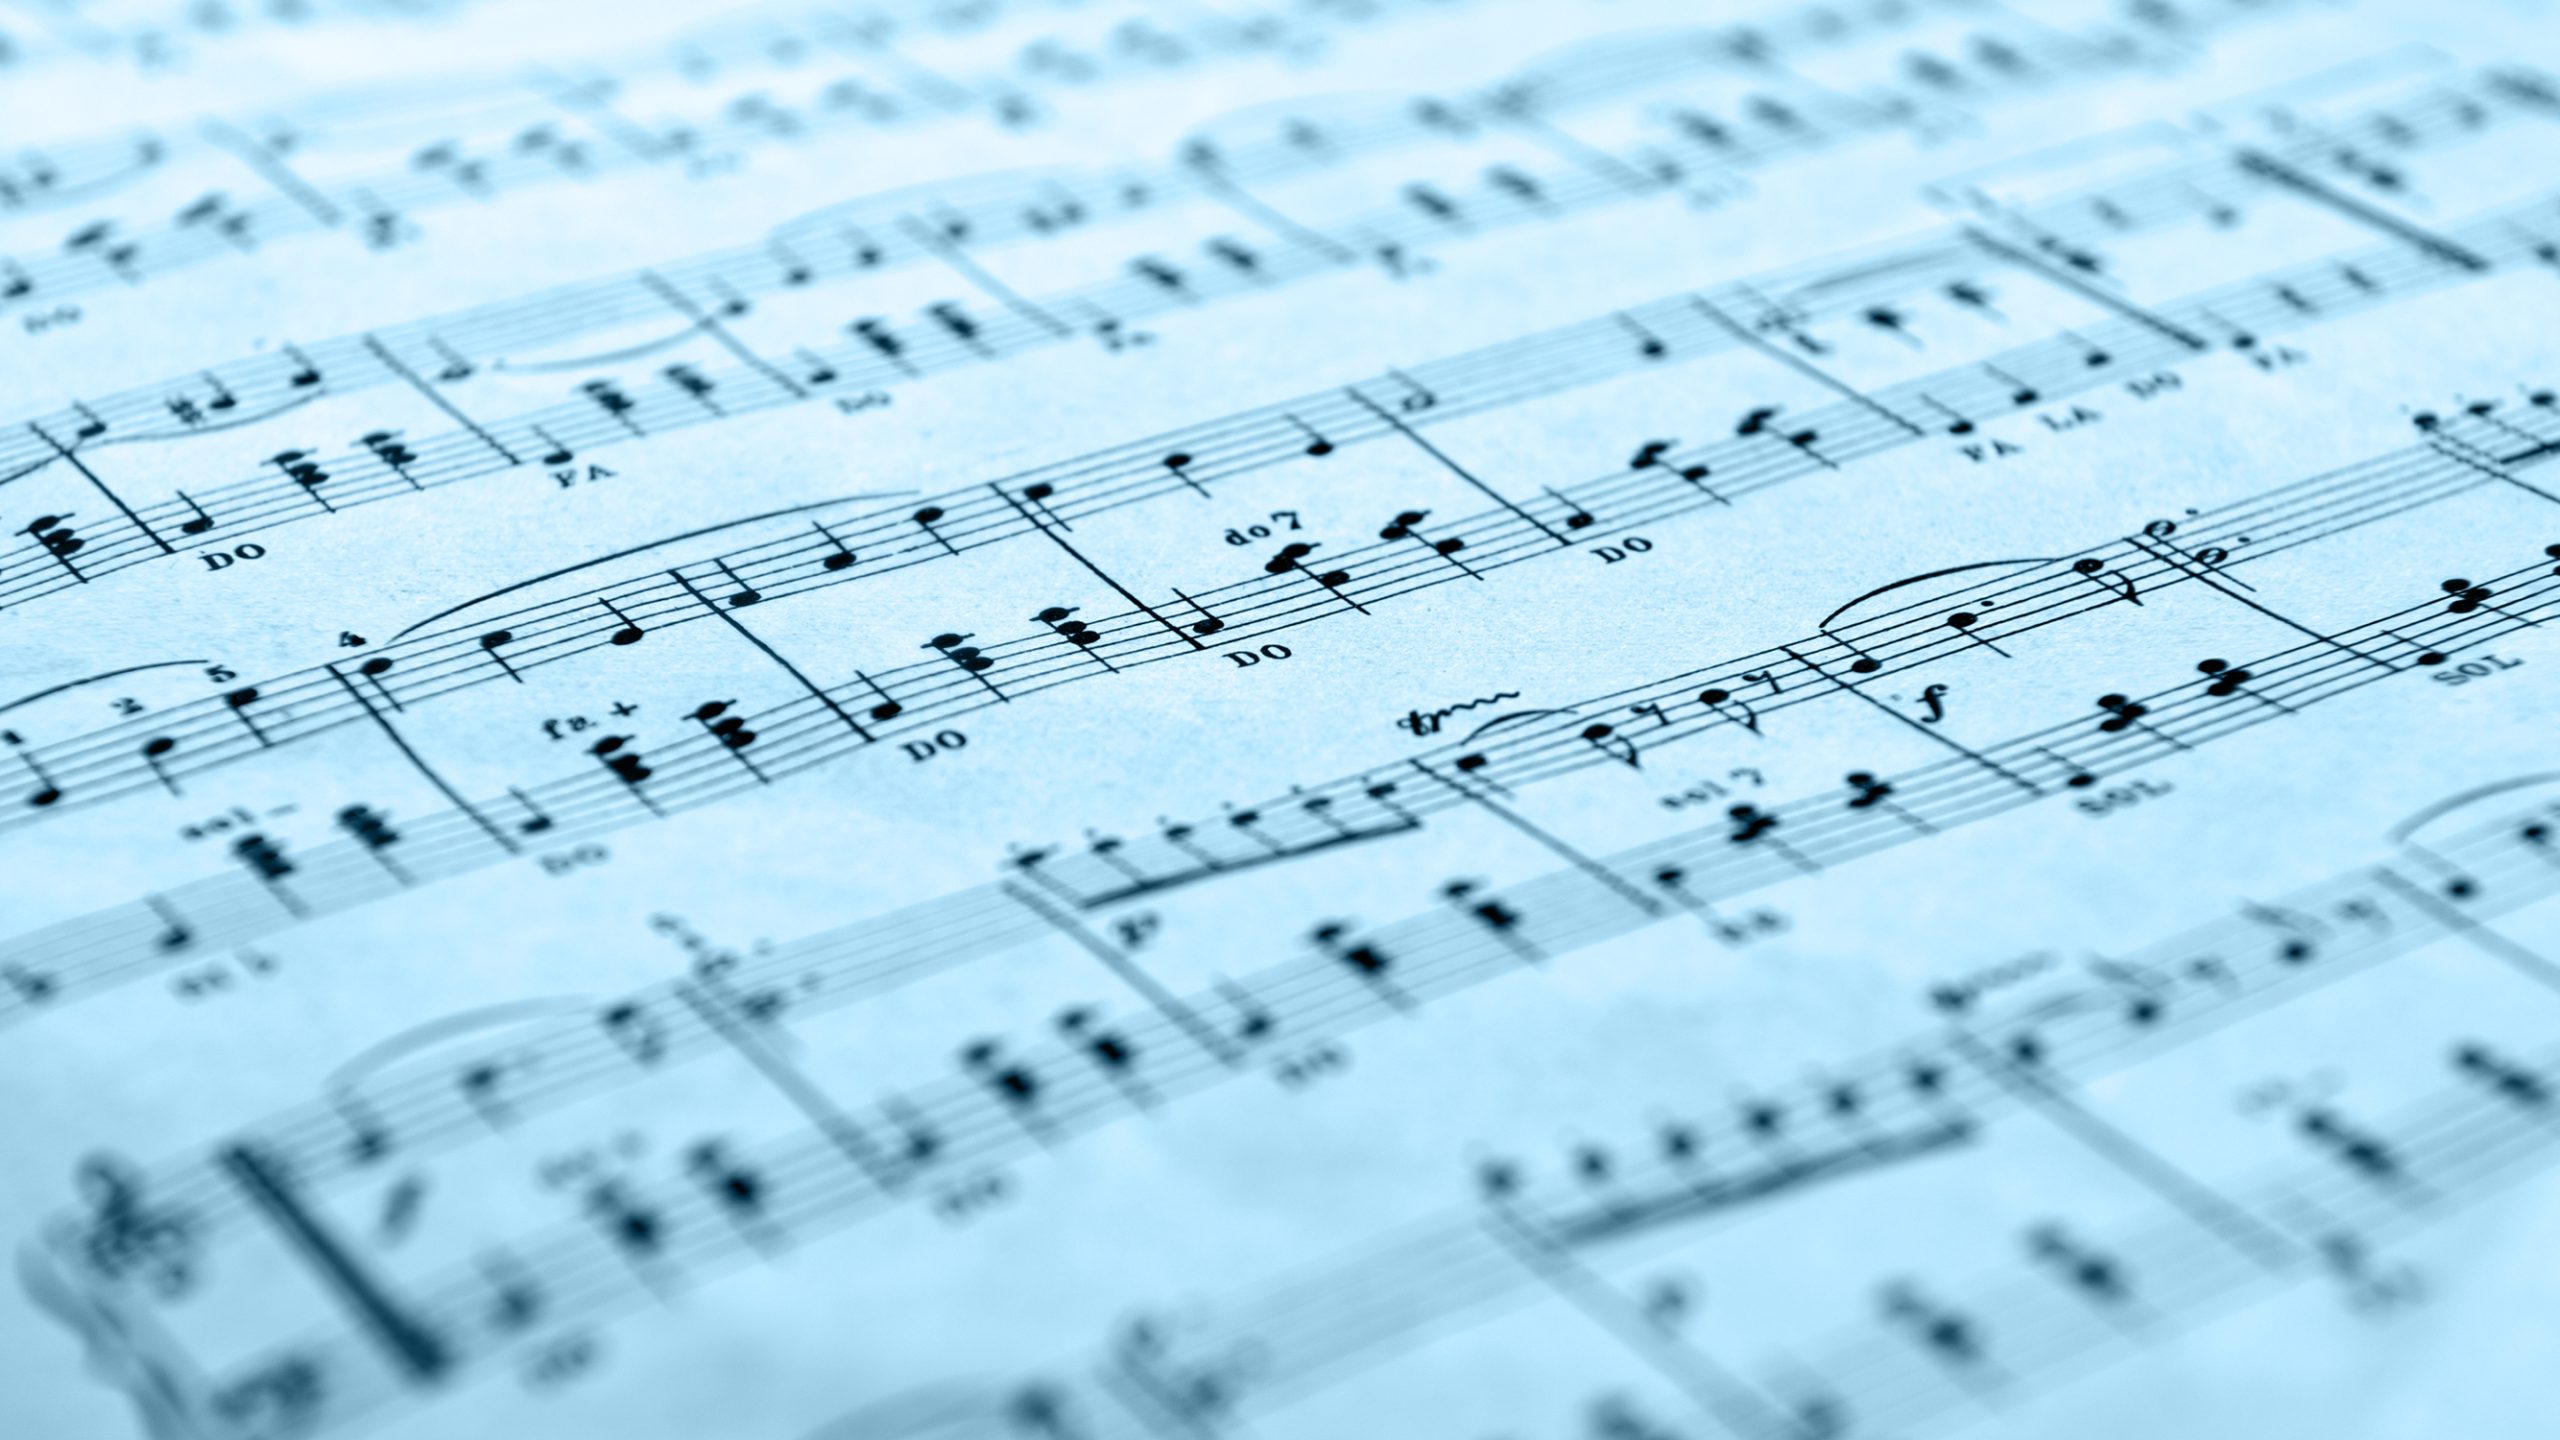 Photo of sheet music with a blue tint